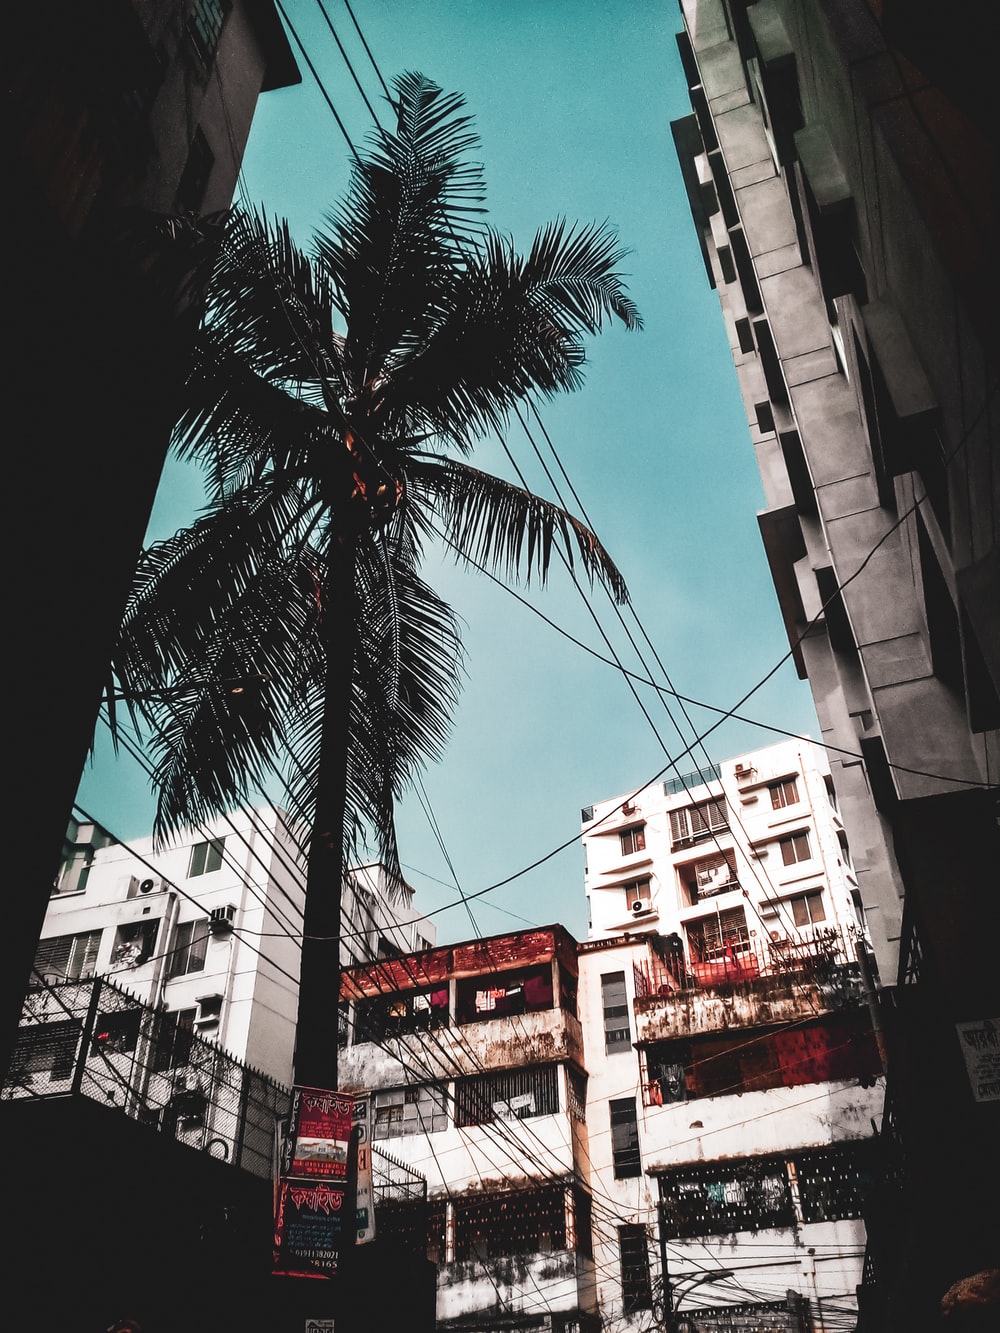 Dhaka City Picture. Download Free Image